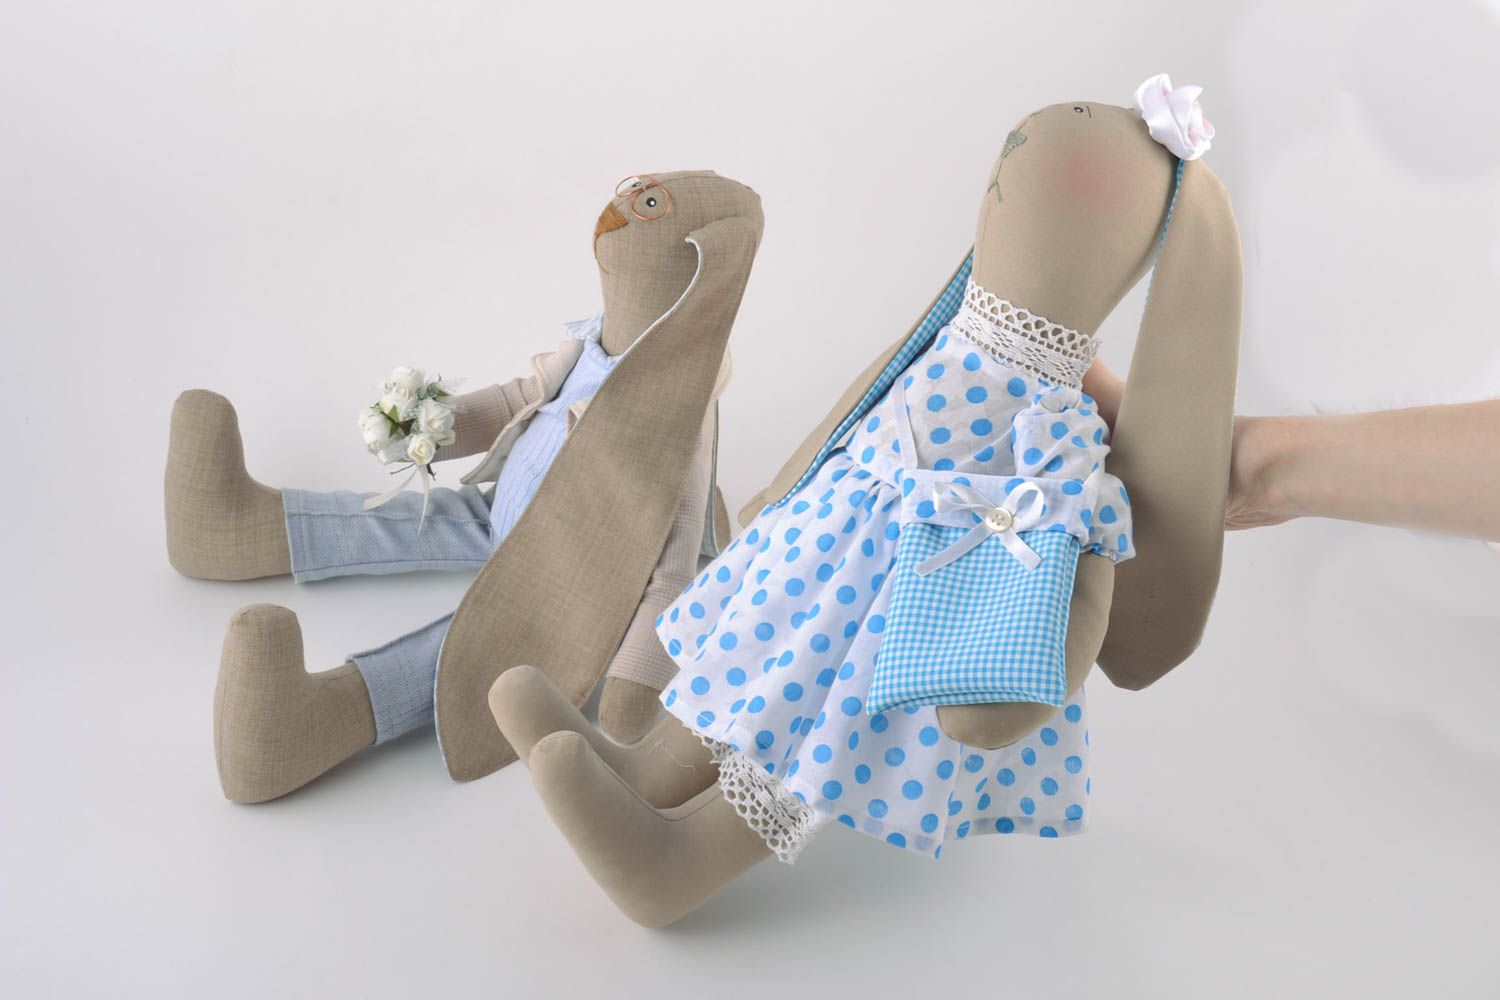 Set of handmade toys fabric Bunnies in love 2 pieces beautiful home decor photo 5